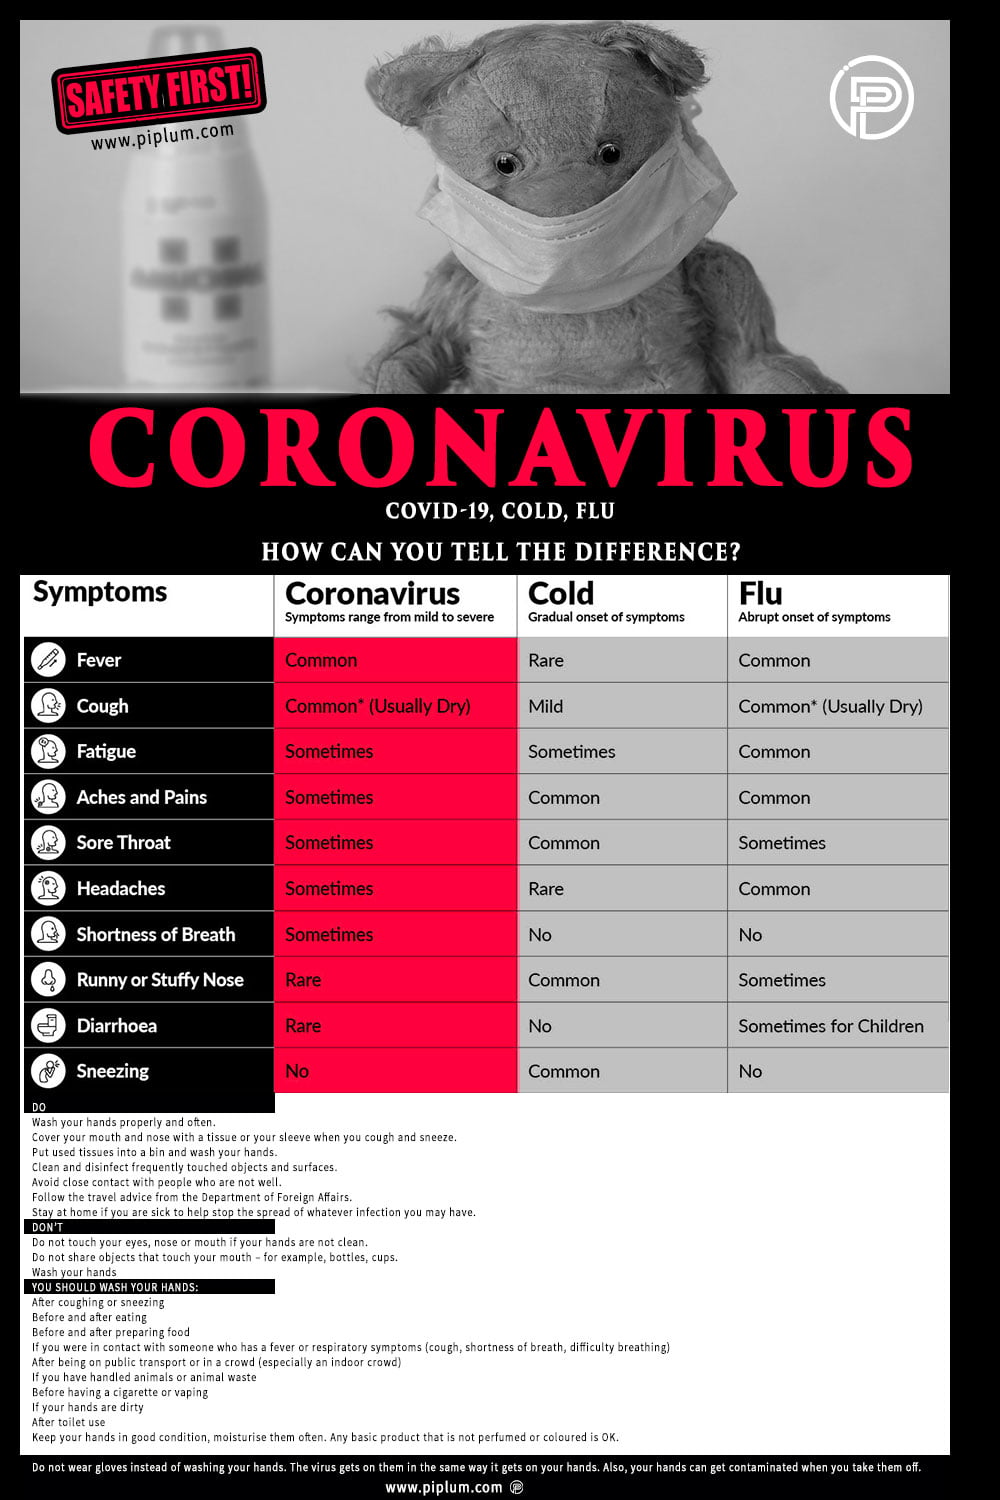 Coronavirus-COVID-19)-Cold-Flu-how-can-you-tell-the-difference-table-poster-chart-info-graphic-new-symptoms